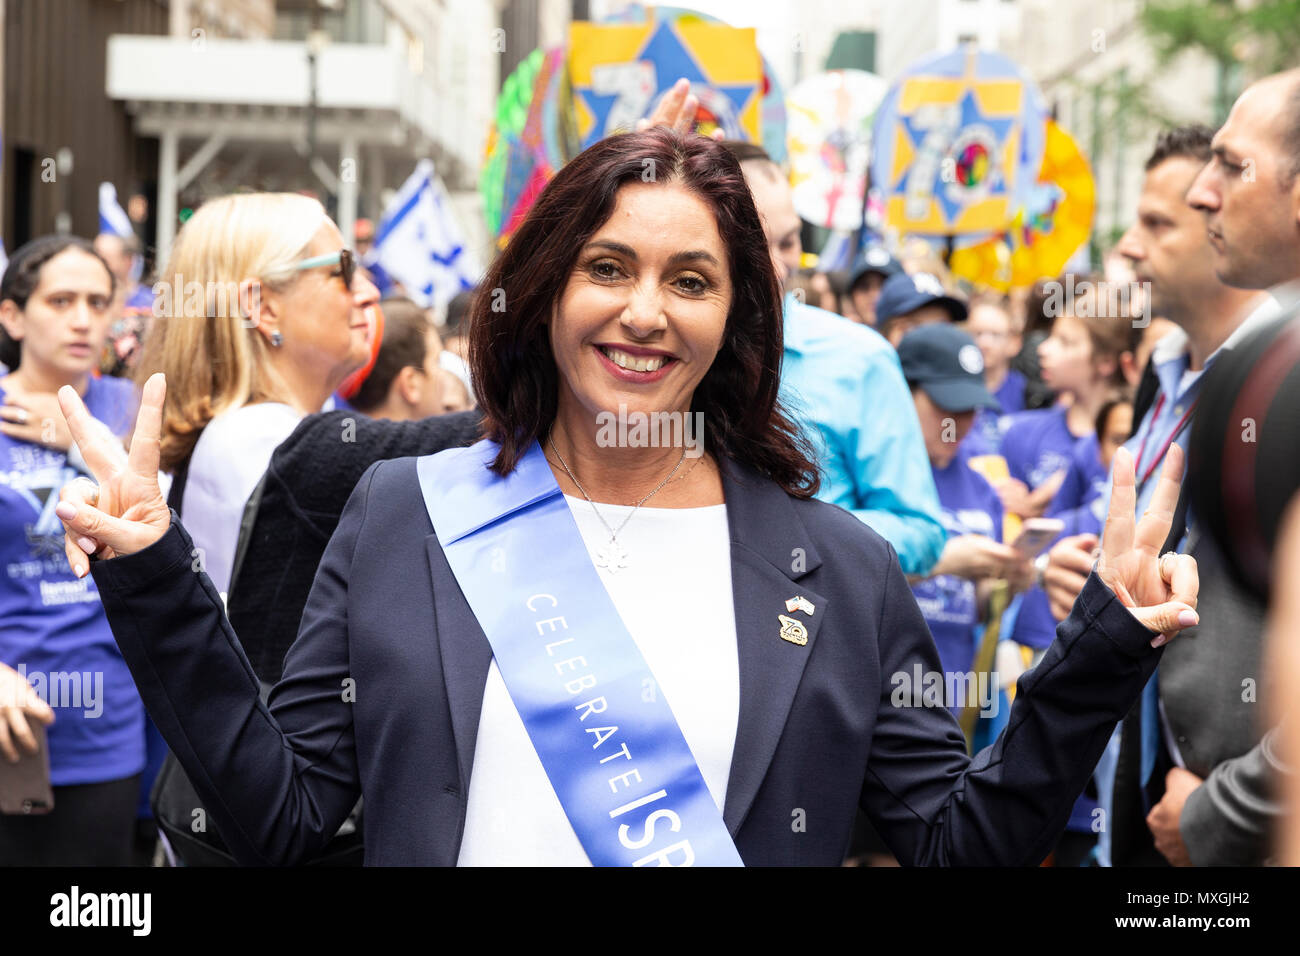 New York, USA - June 3, 2018: Minister of Culture Miri Regev attends Celebrate Israel Parade on theme 70 & Sababa (70 & Awesome) on 5th Avenue in Manhattan Credit: lev radin/Alamy Live News Stock Photo